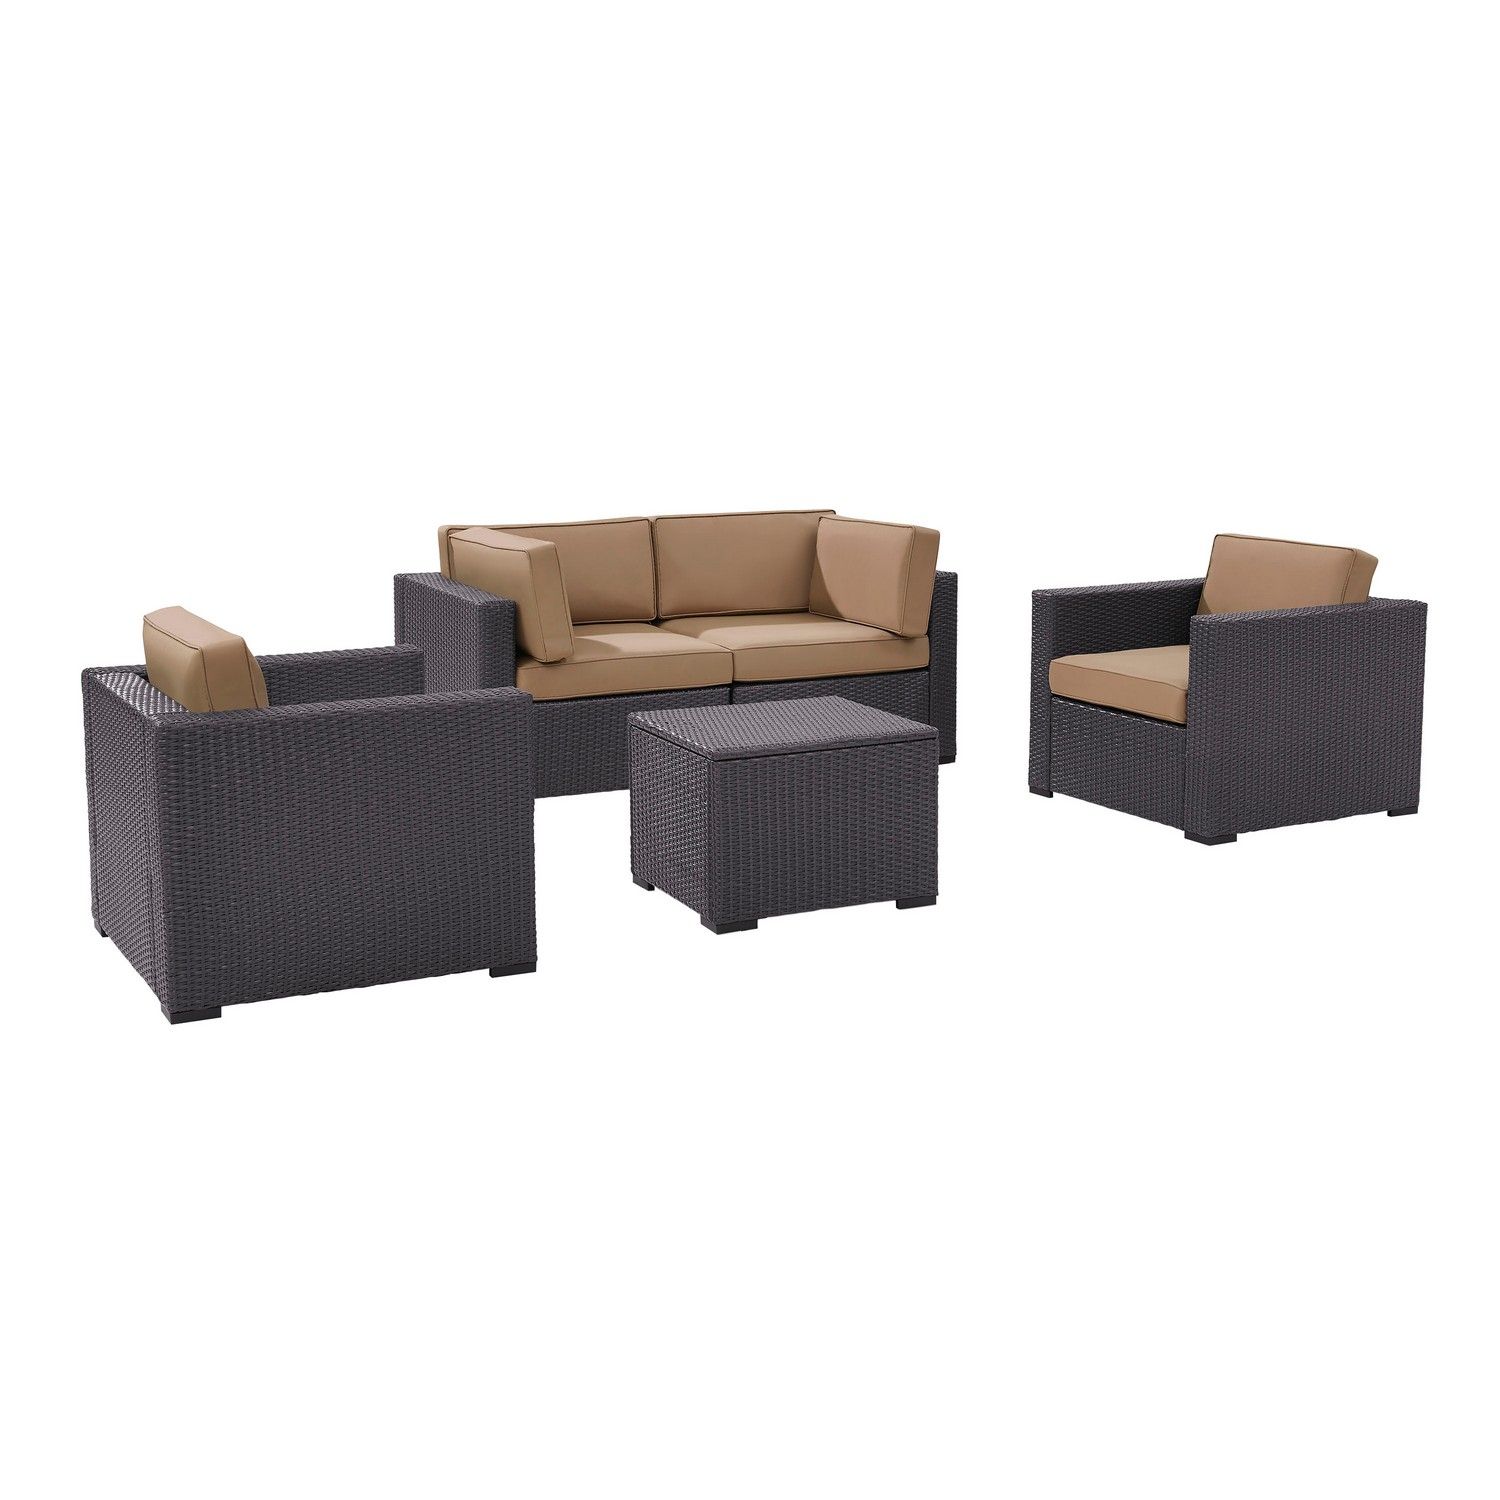 Crosley Biscayne 5-PC Outdoor Wicker Sectional Set - 2 Armchairs, 2 Corner Chair, Coffee Table - Mocha/Brown